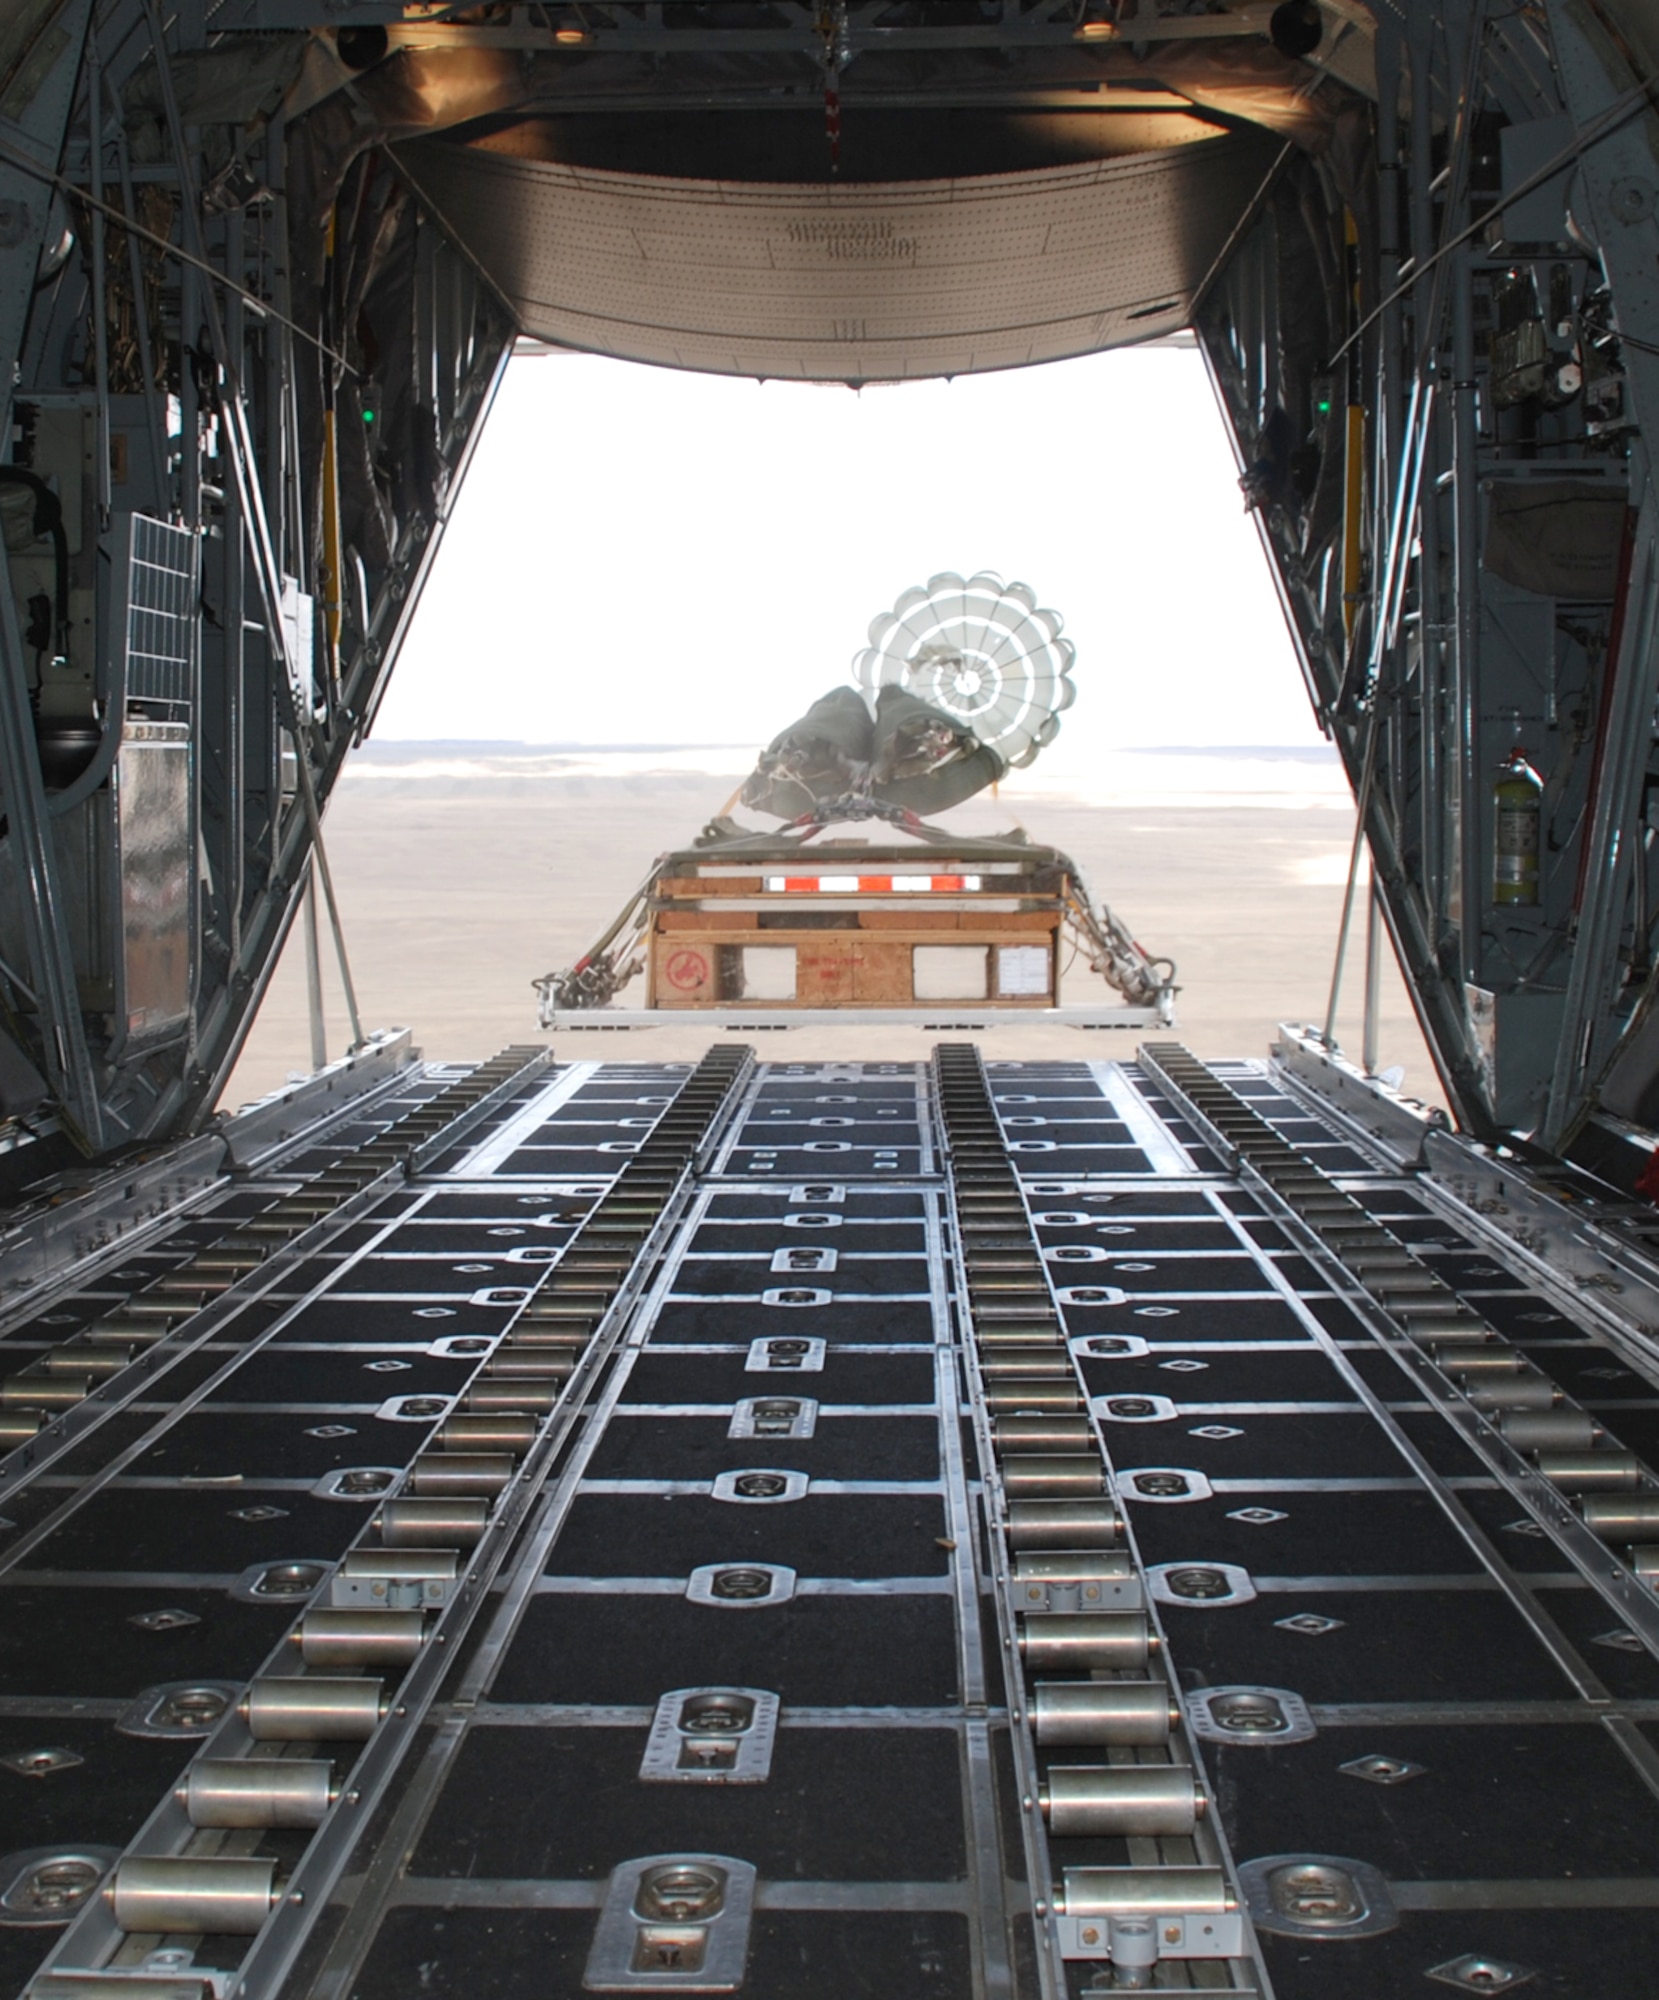 A cargo pallet drops from a C-130 aircraft during a training flight Oct. 7. The pallet is released from the aircraft when a connected parachute is deployed and catches winds out the back.